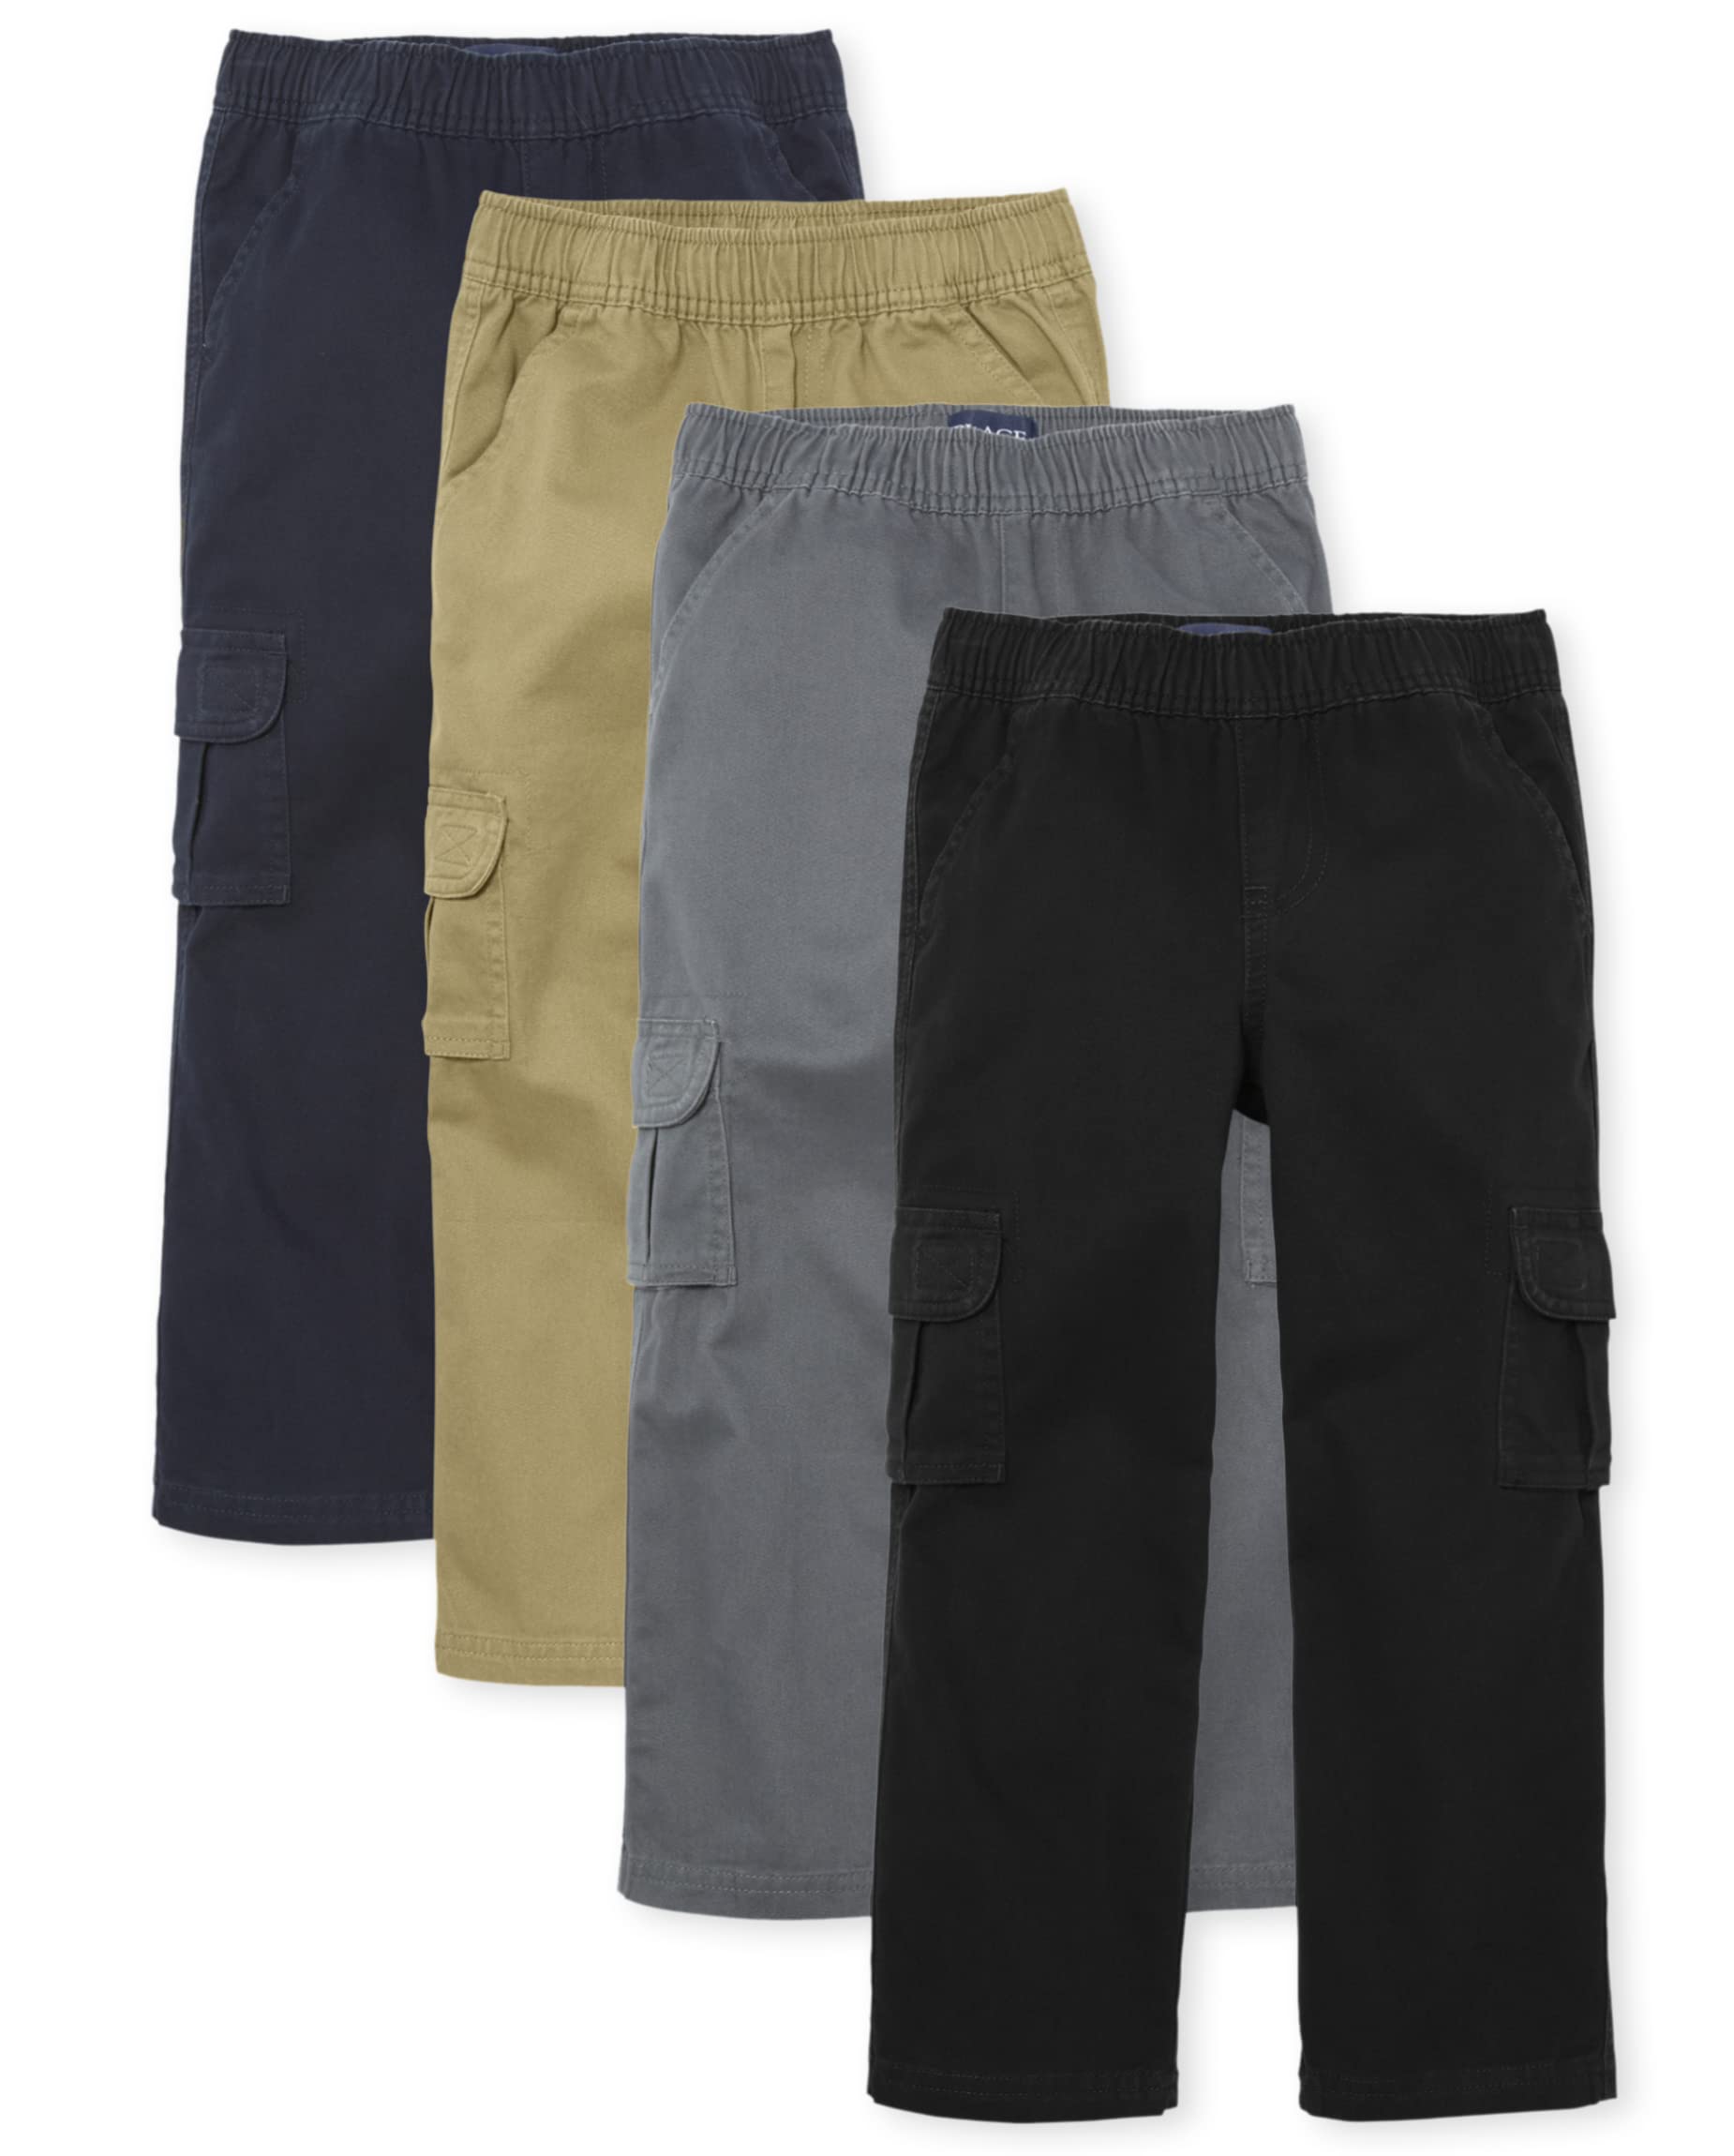 The Children's Place Boys Pull on Cargo Pants,Black/Flax/Gray Steel/New Navy 4 Pack,10